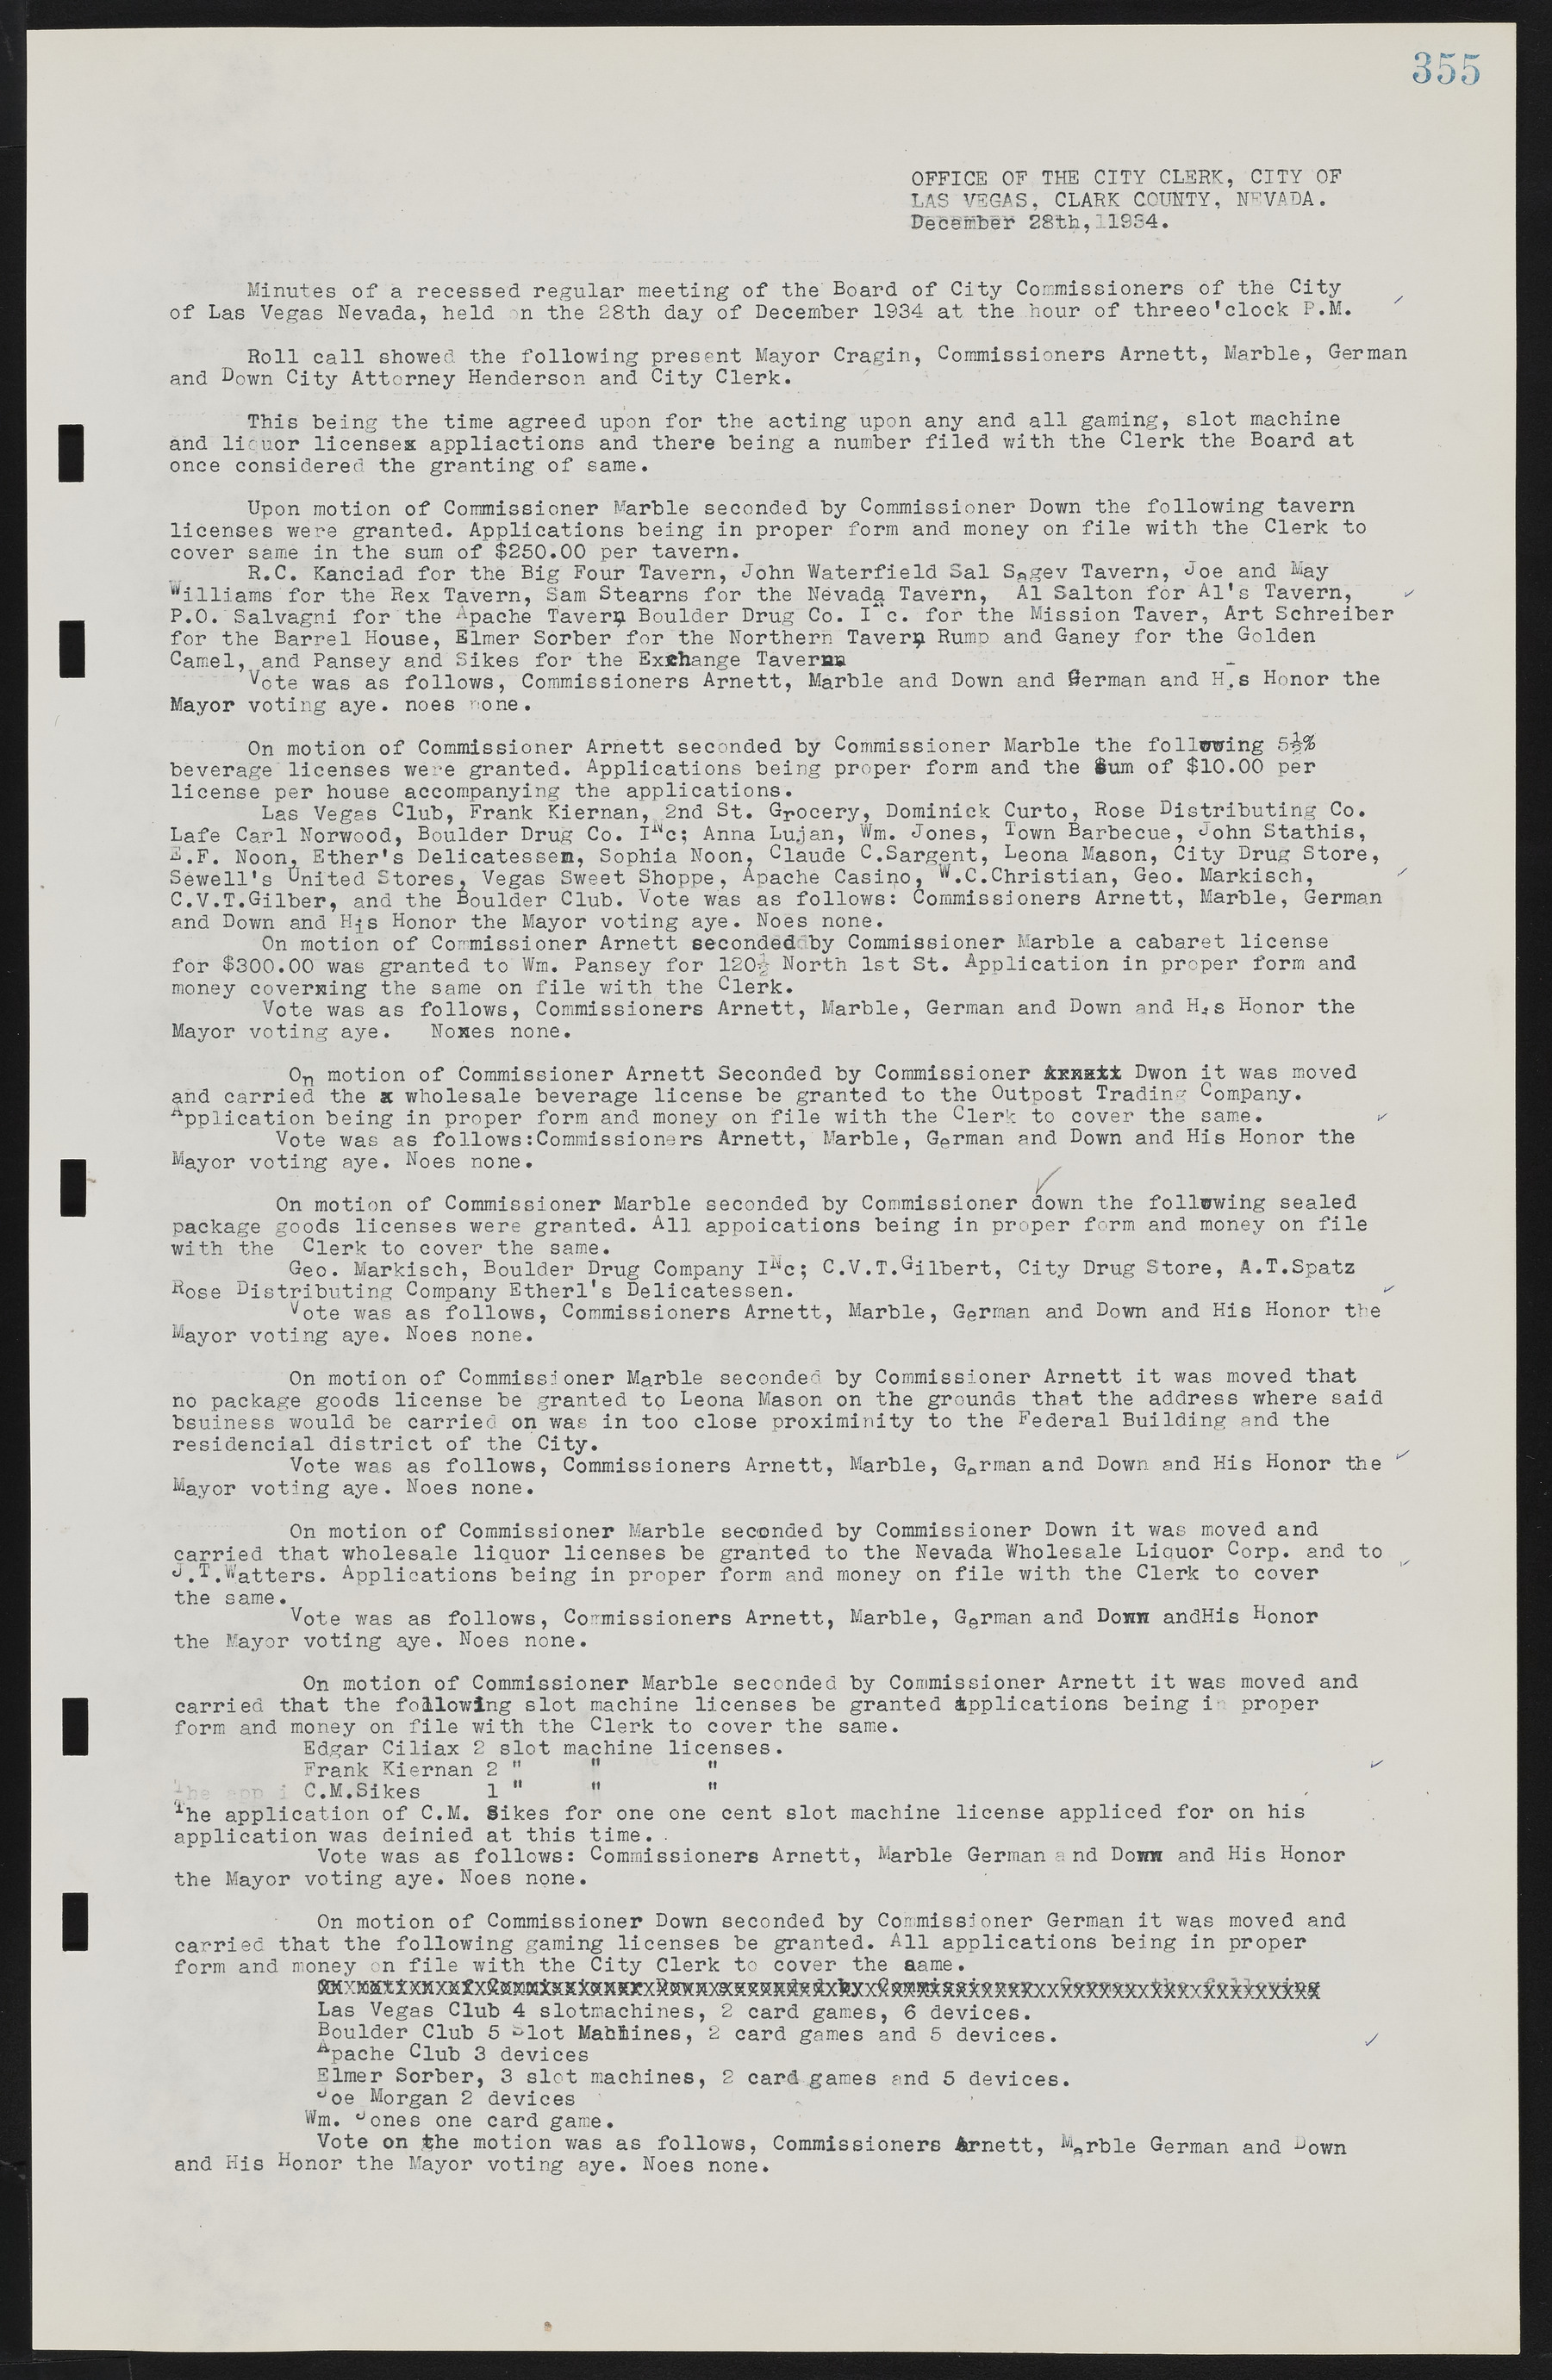 Las Vegas City Commission Minutes, May 14, 1929 to February 11, 1937, lvc000003-362